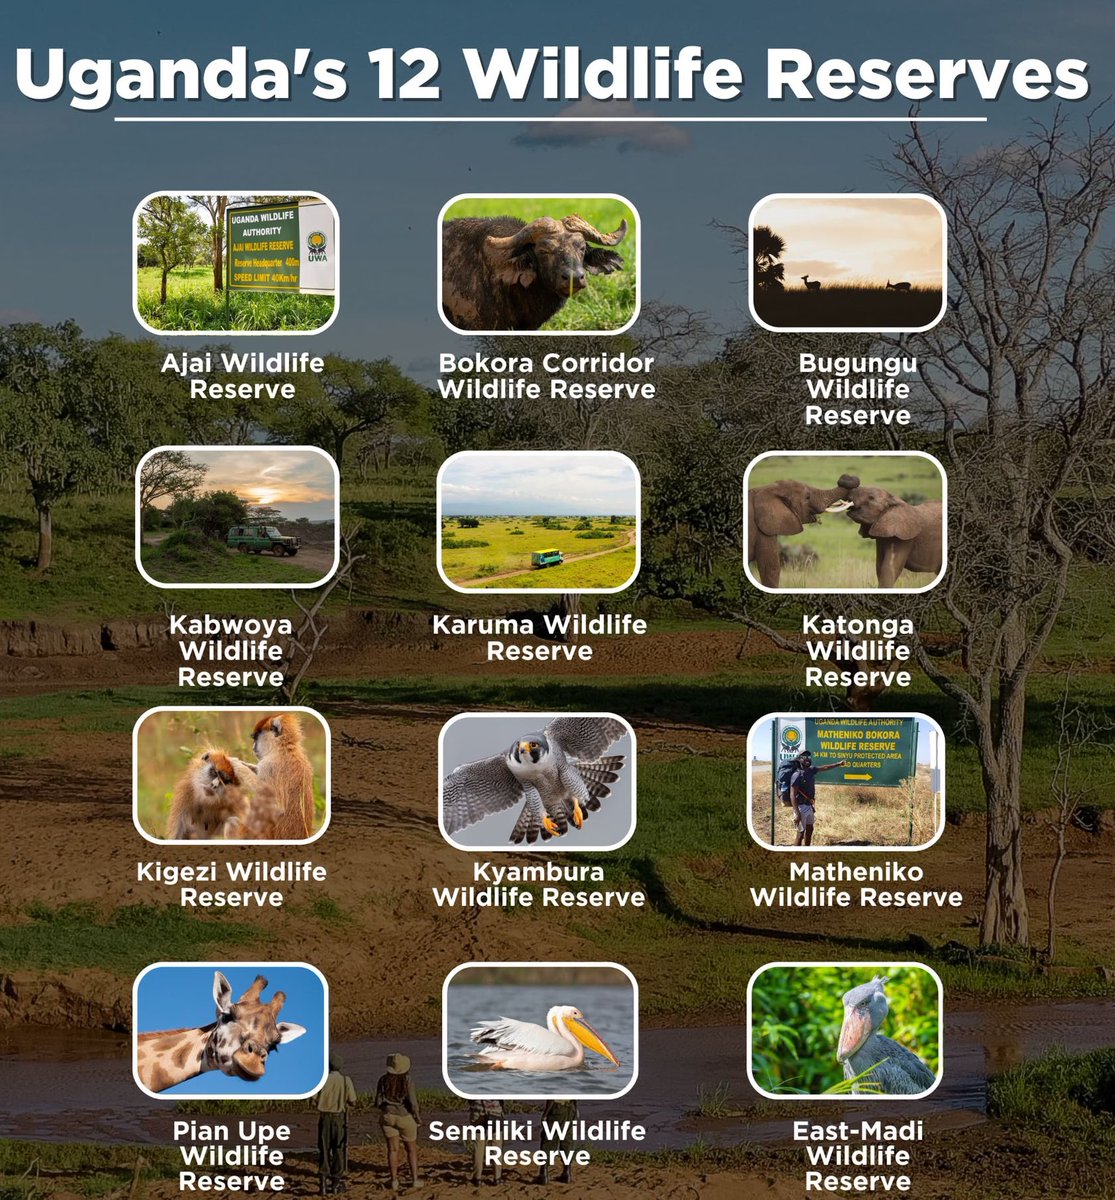 How many reserves have you visited so far? Today, I have finally visited Kabwoya Game Reserve, one to go East-Madi wildlife reserve, we need those pics also😁🤝